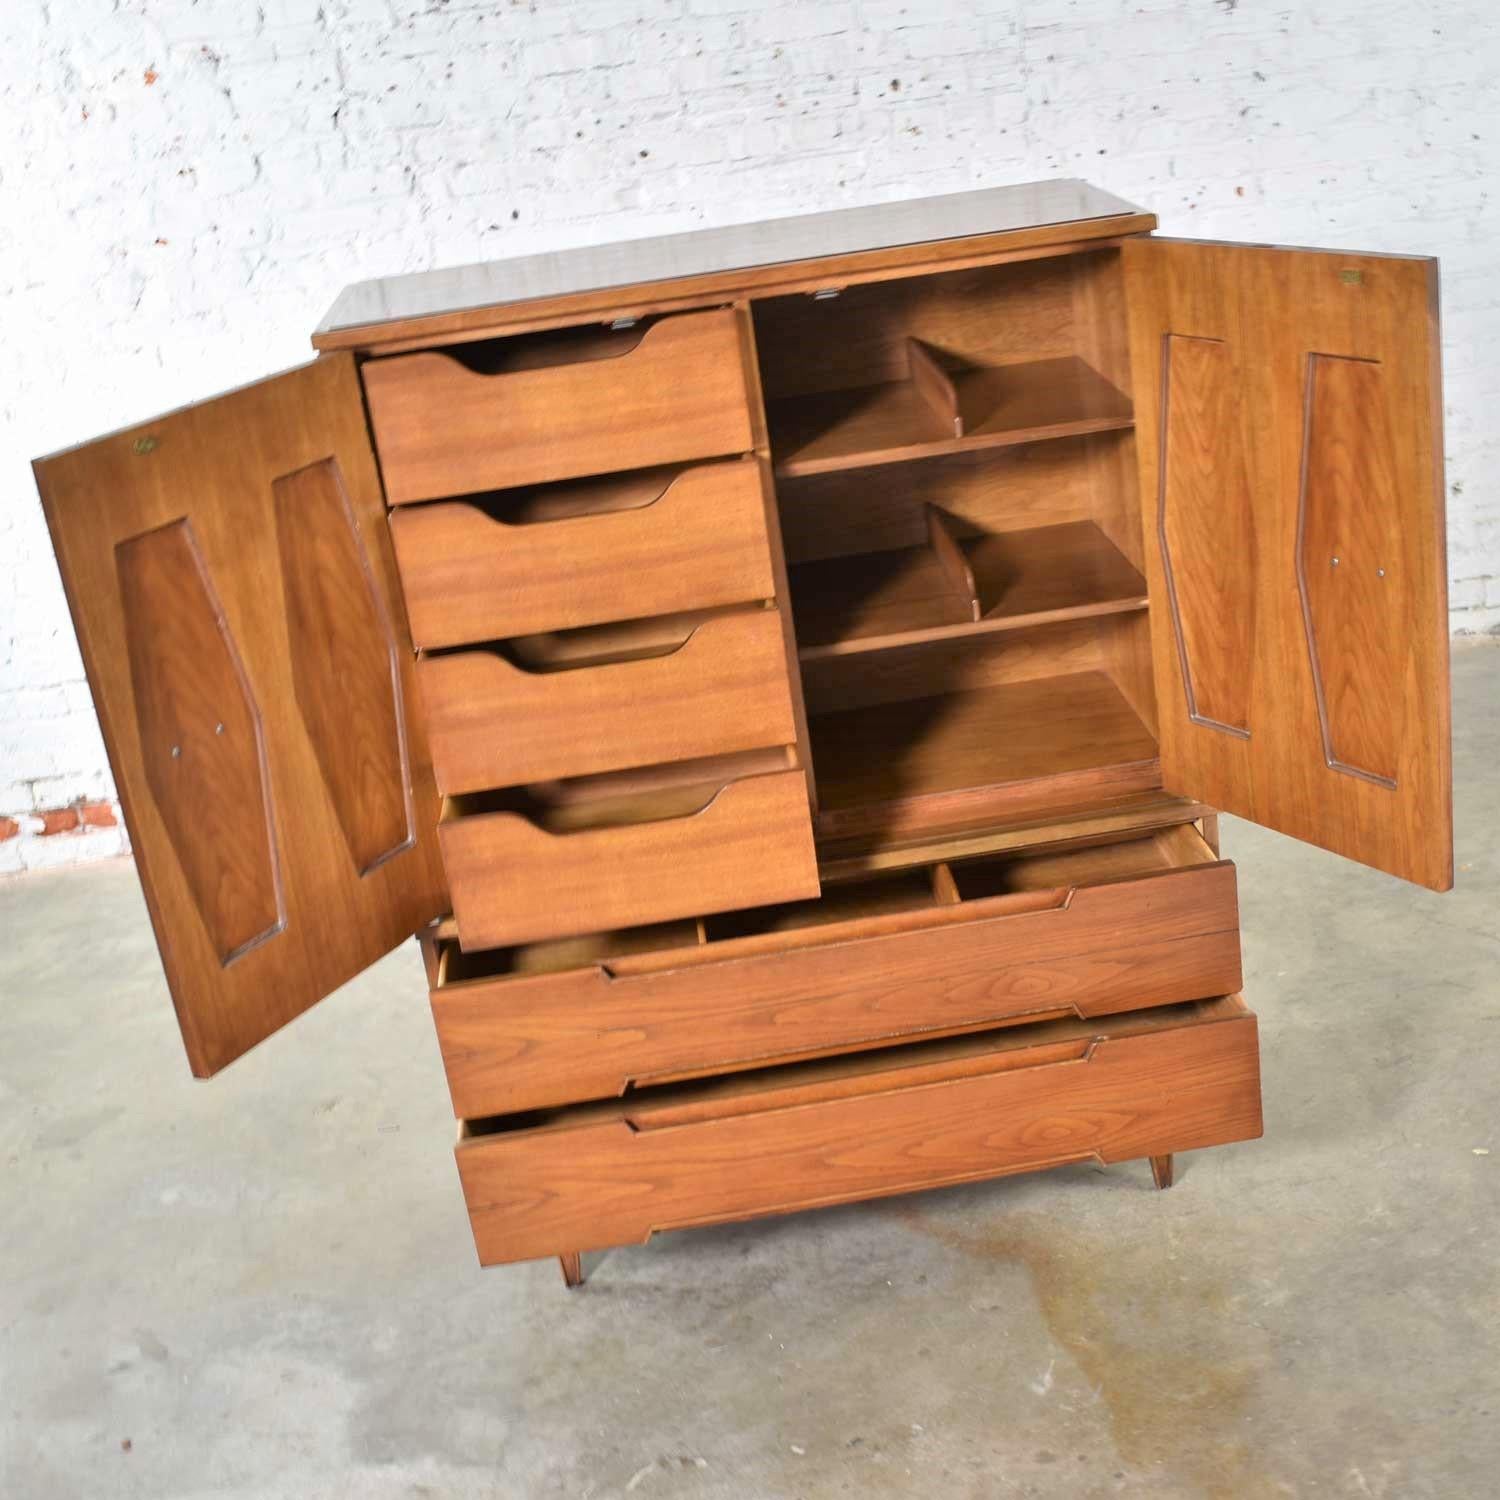 Ash Midcentury Gentlemen’s Chest with Hexagon Paneled Design and Brass Hardware For Sale